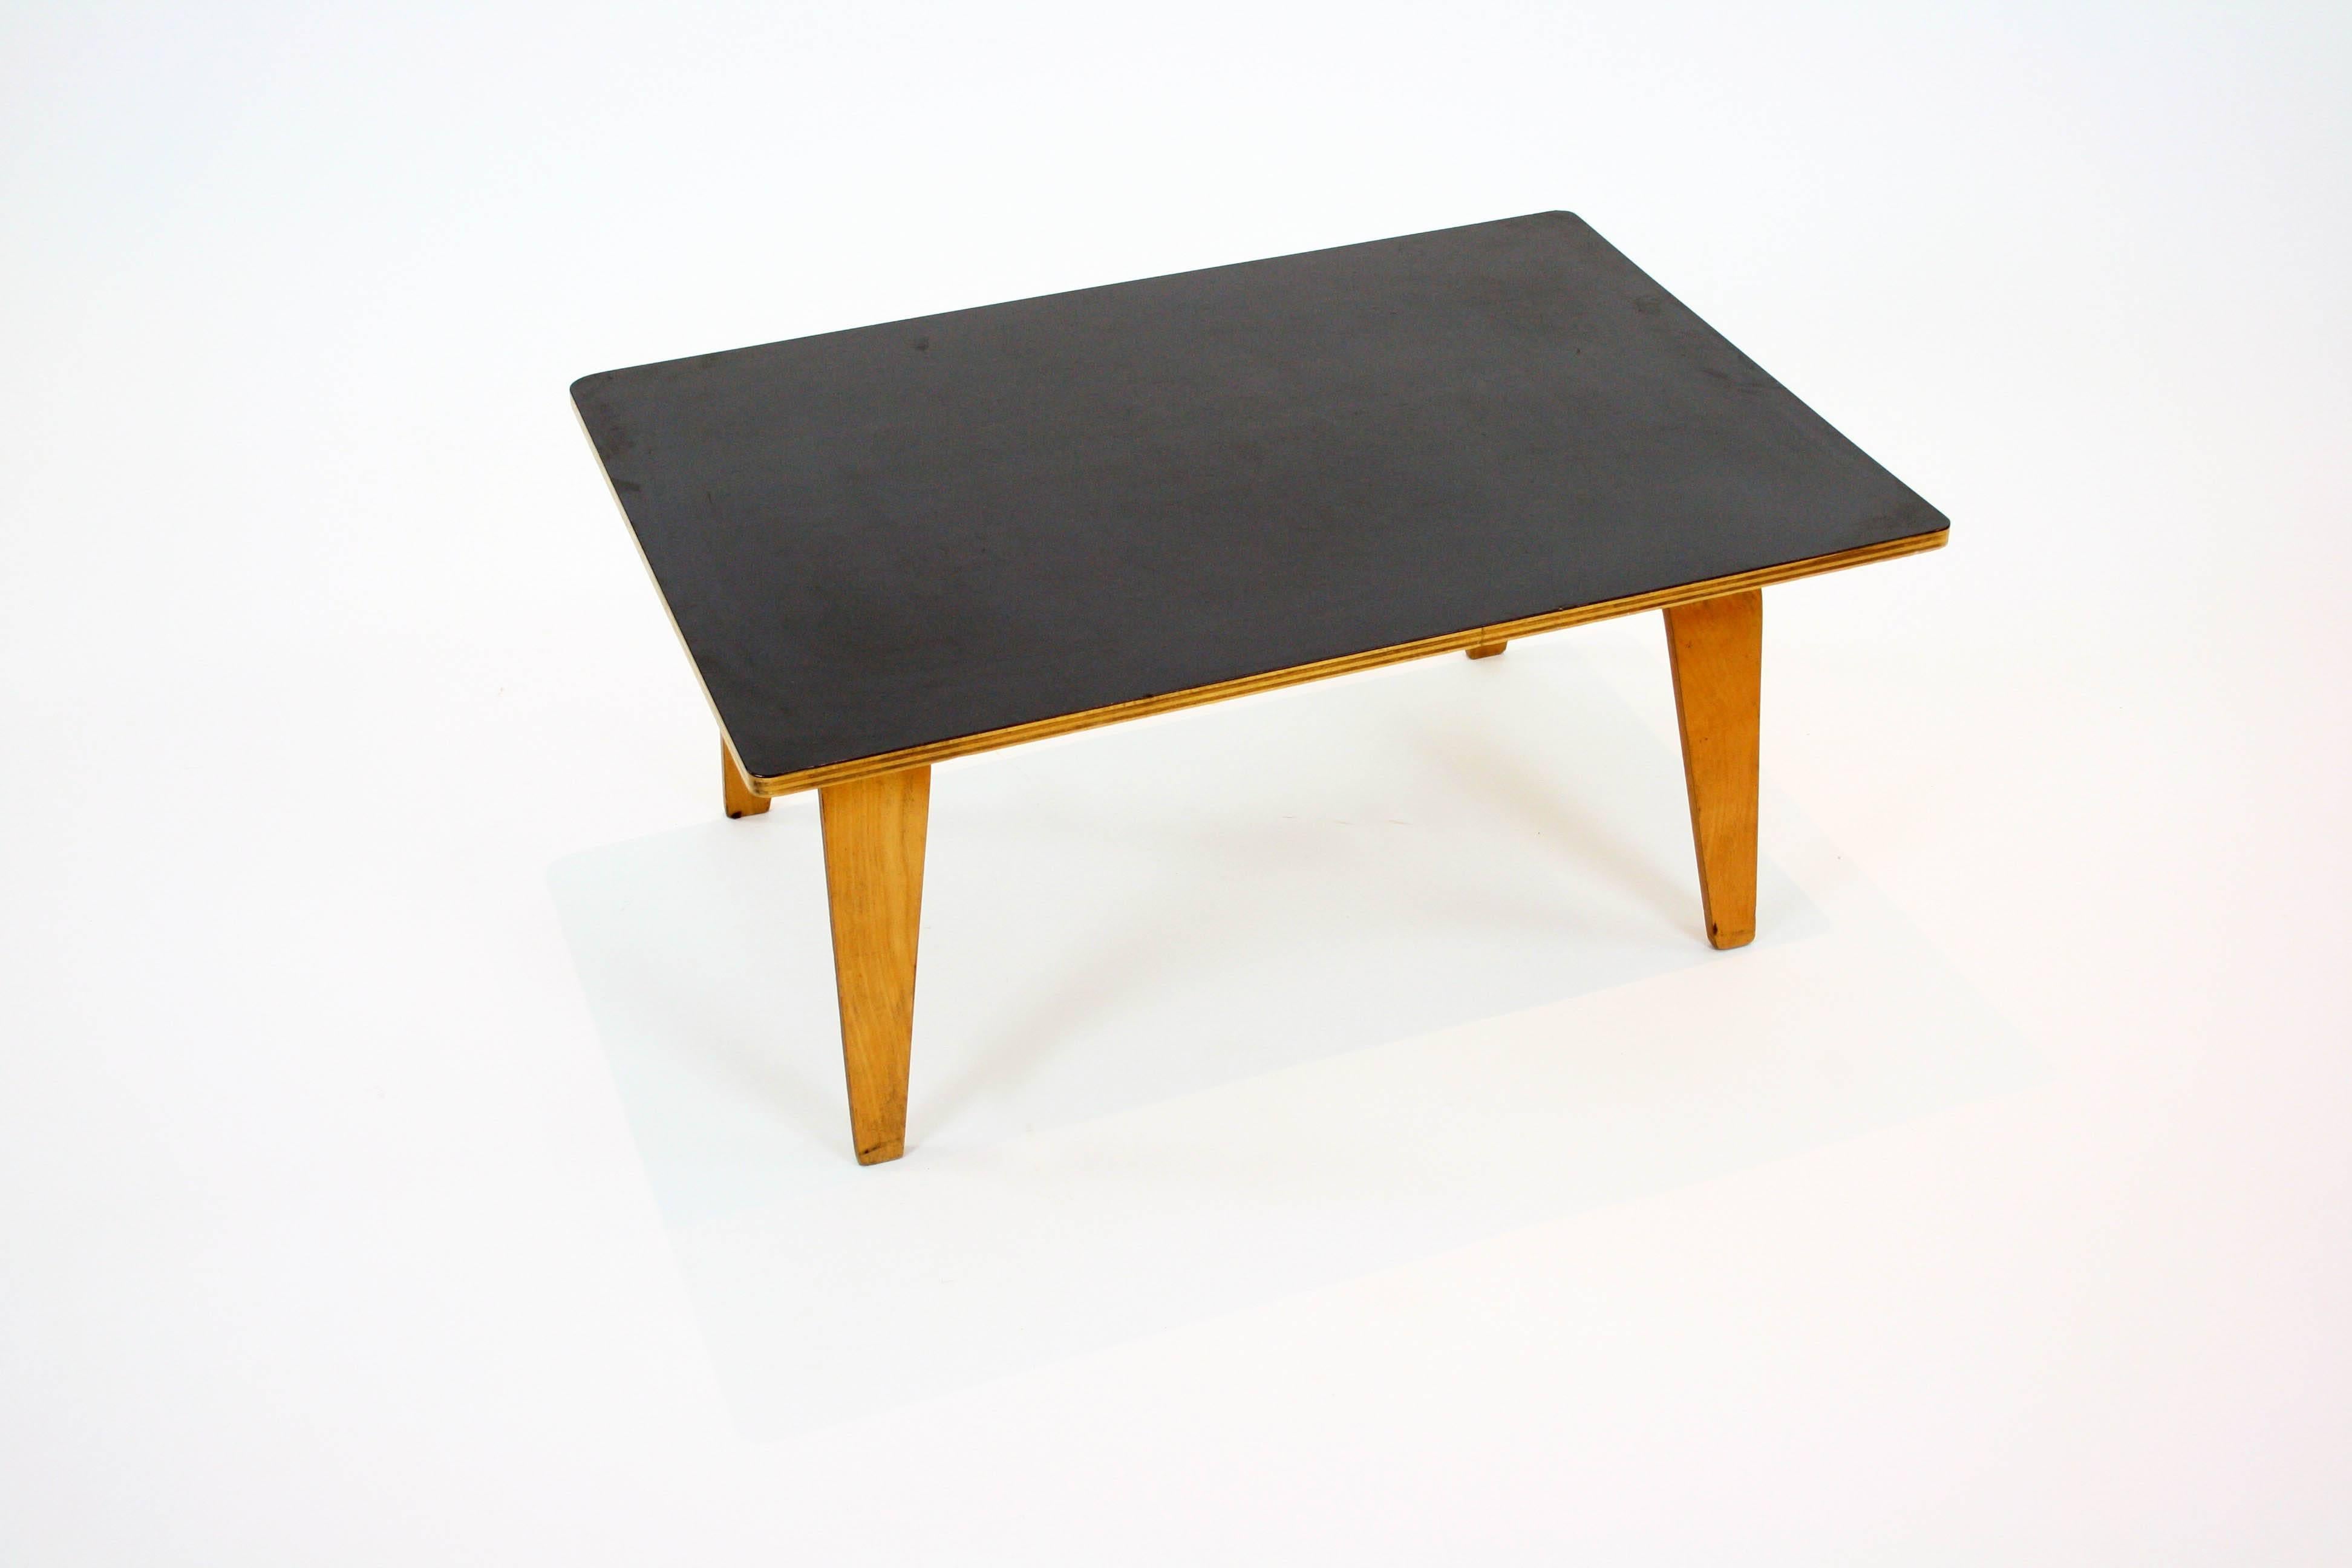 OTW coffee table designed by Charles and Ray Eames with black top. Designed by Charles and Ray Eames in 1946, the 